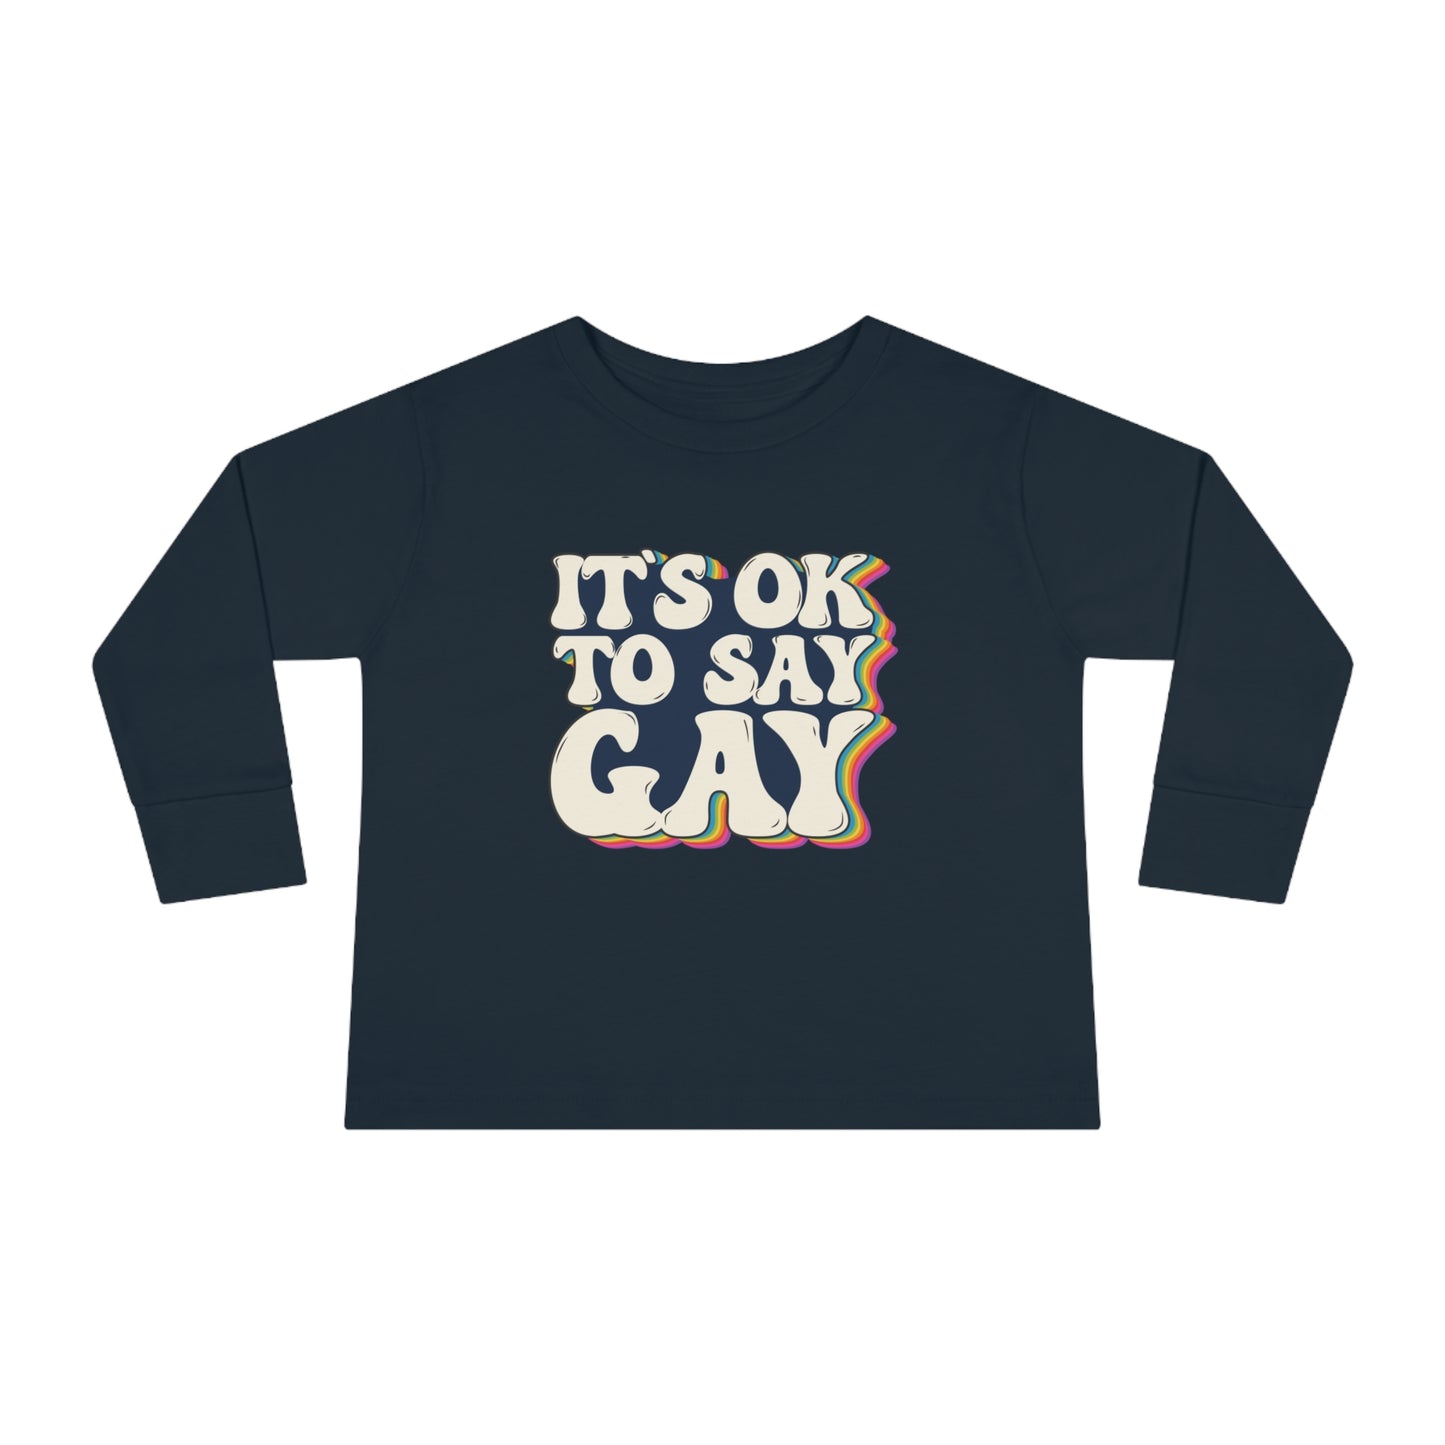 “It’s OK to Say Gay” Toddler Long Sleeve Tee